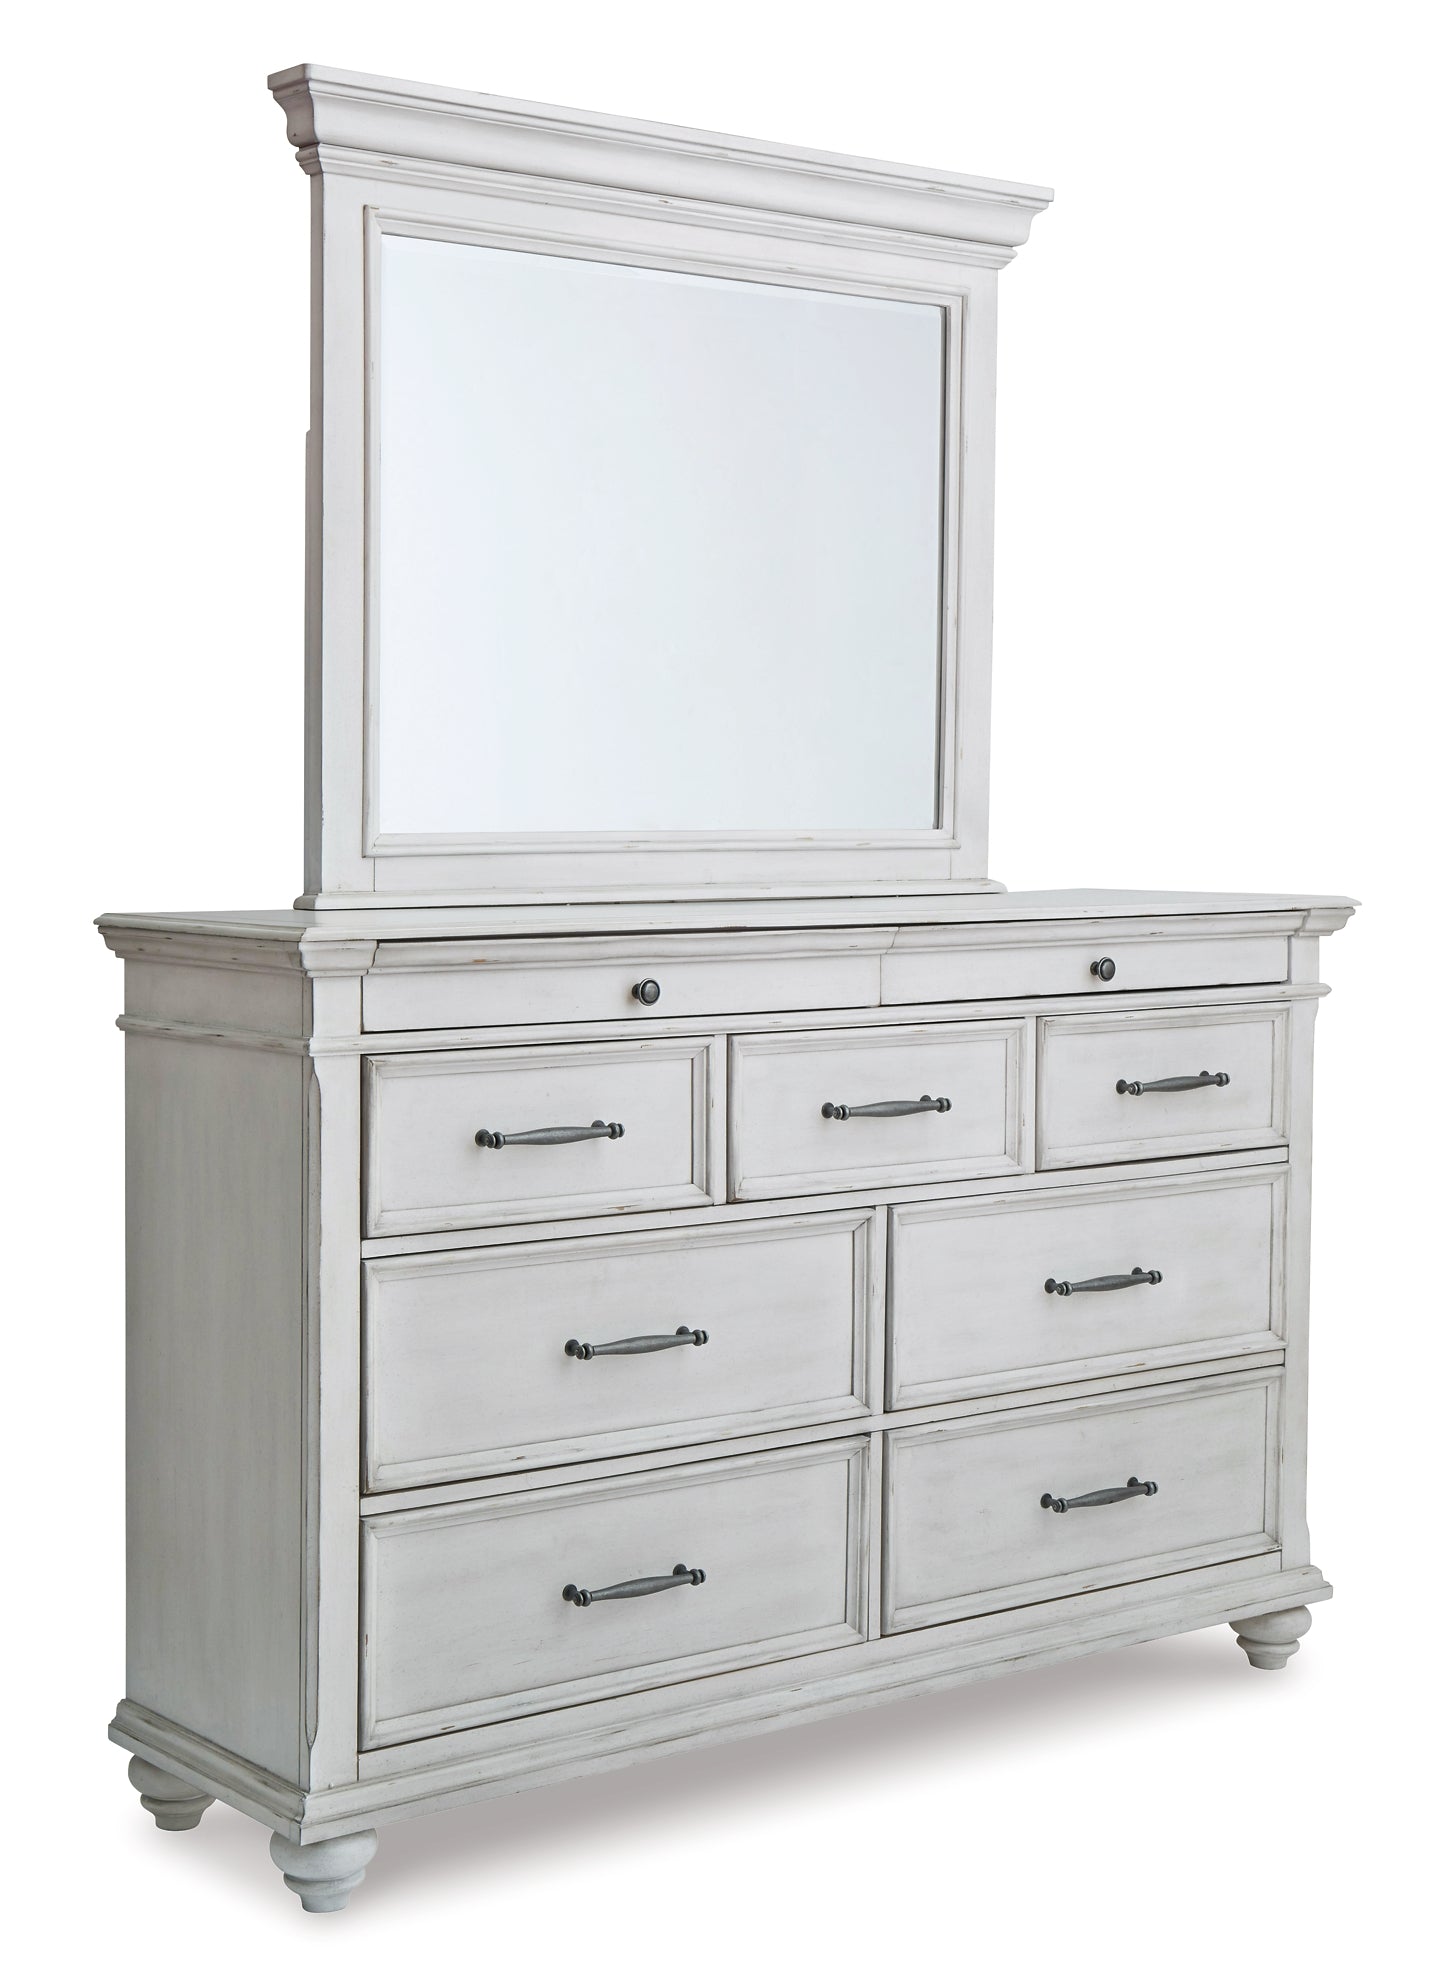 Kanwyn King Panel Bed with Storage with Mirrored Dresser, Chest and Nightstand Wilson Furniture (OH)  in Bridgeport, Ohio. Serving Bridgeport, Yorkville, Bellaire, & Avondale